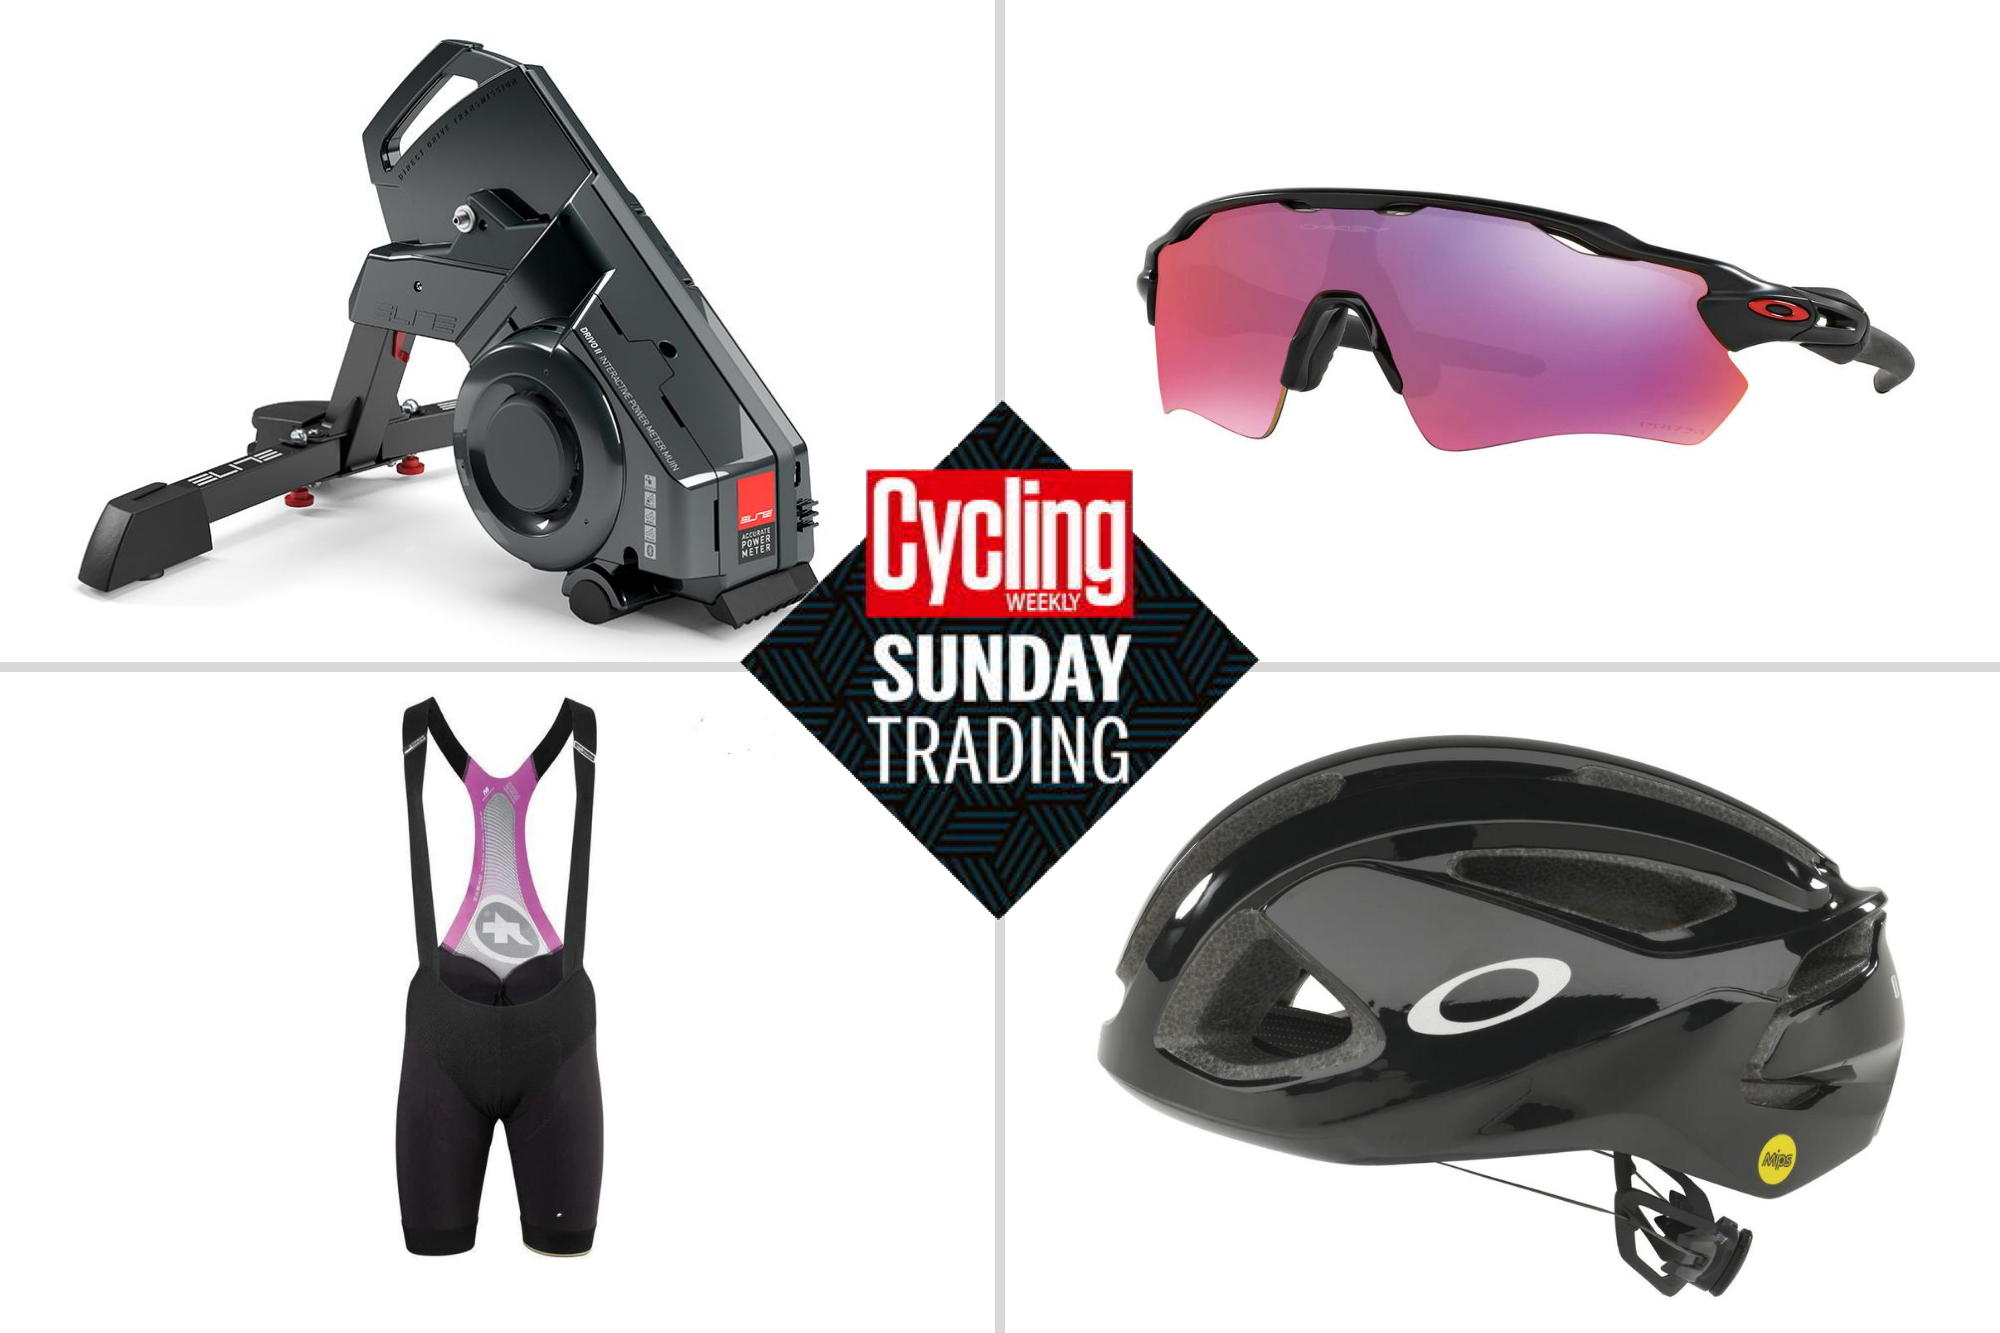 Sunday trading: Big discounts on Oakleys and Assos kit | Cycling Weekly